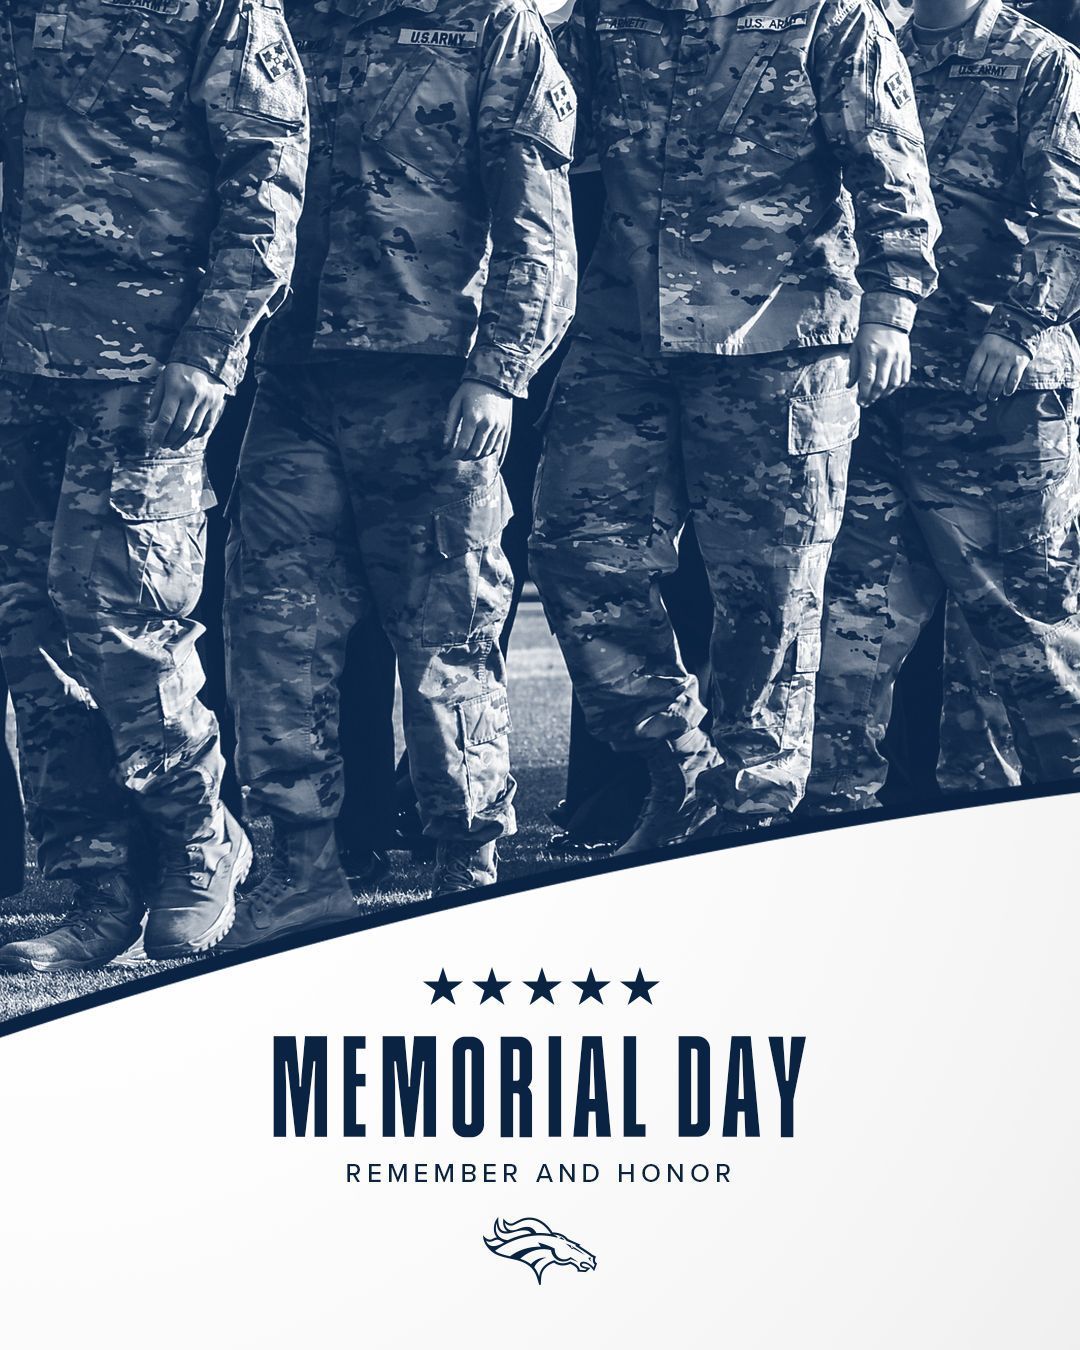 Today and every day, we remember and honor the brave men & women who made the ul...